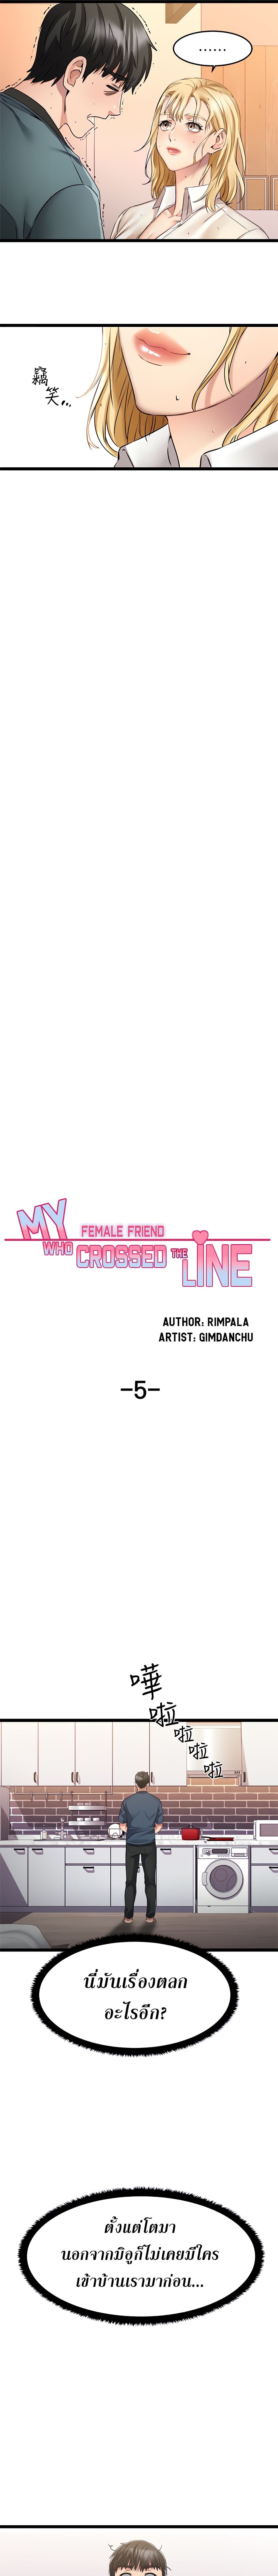 Crossing The Line 5-5